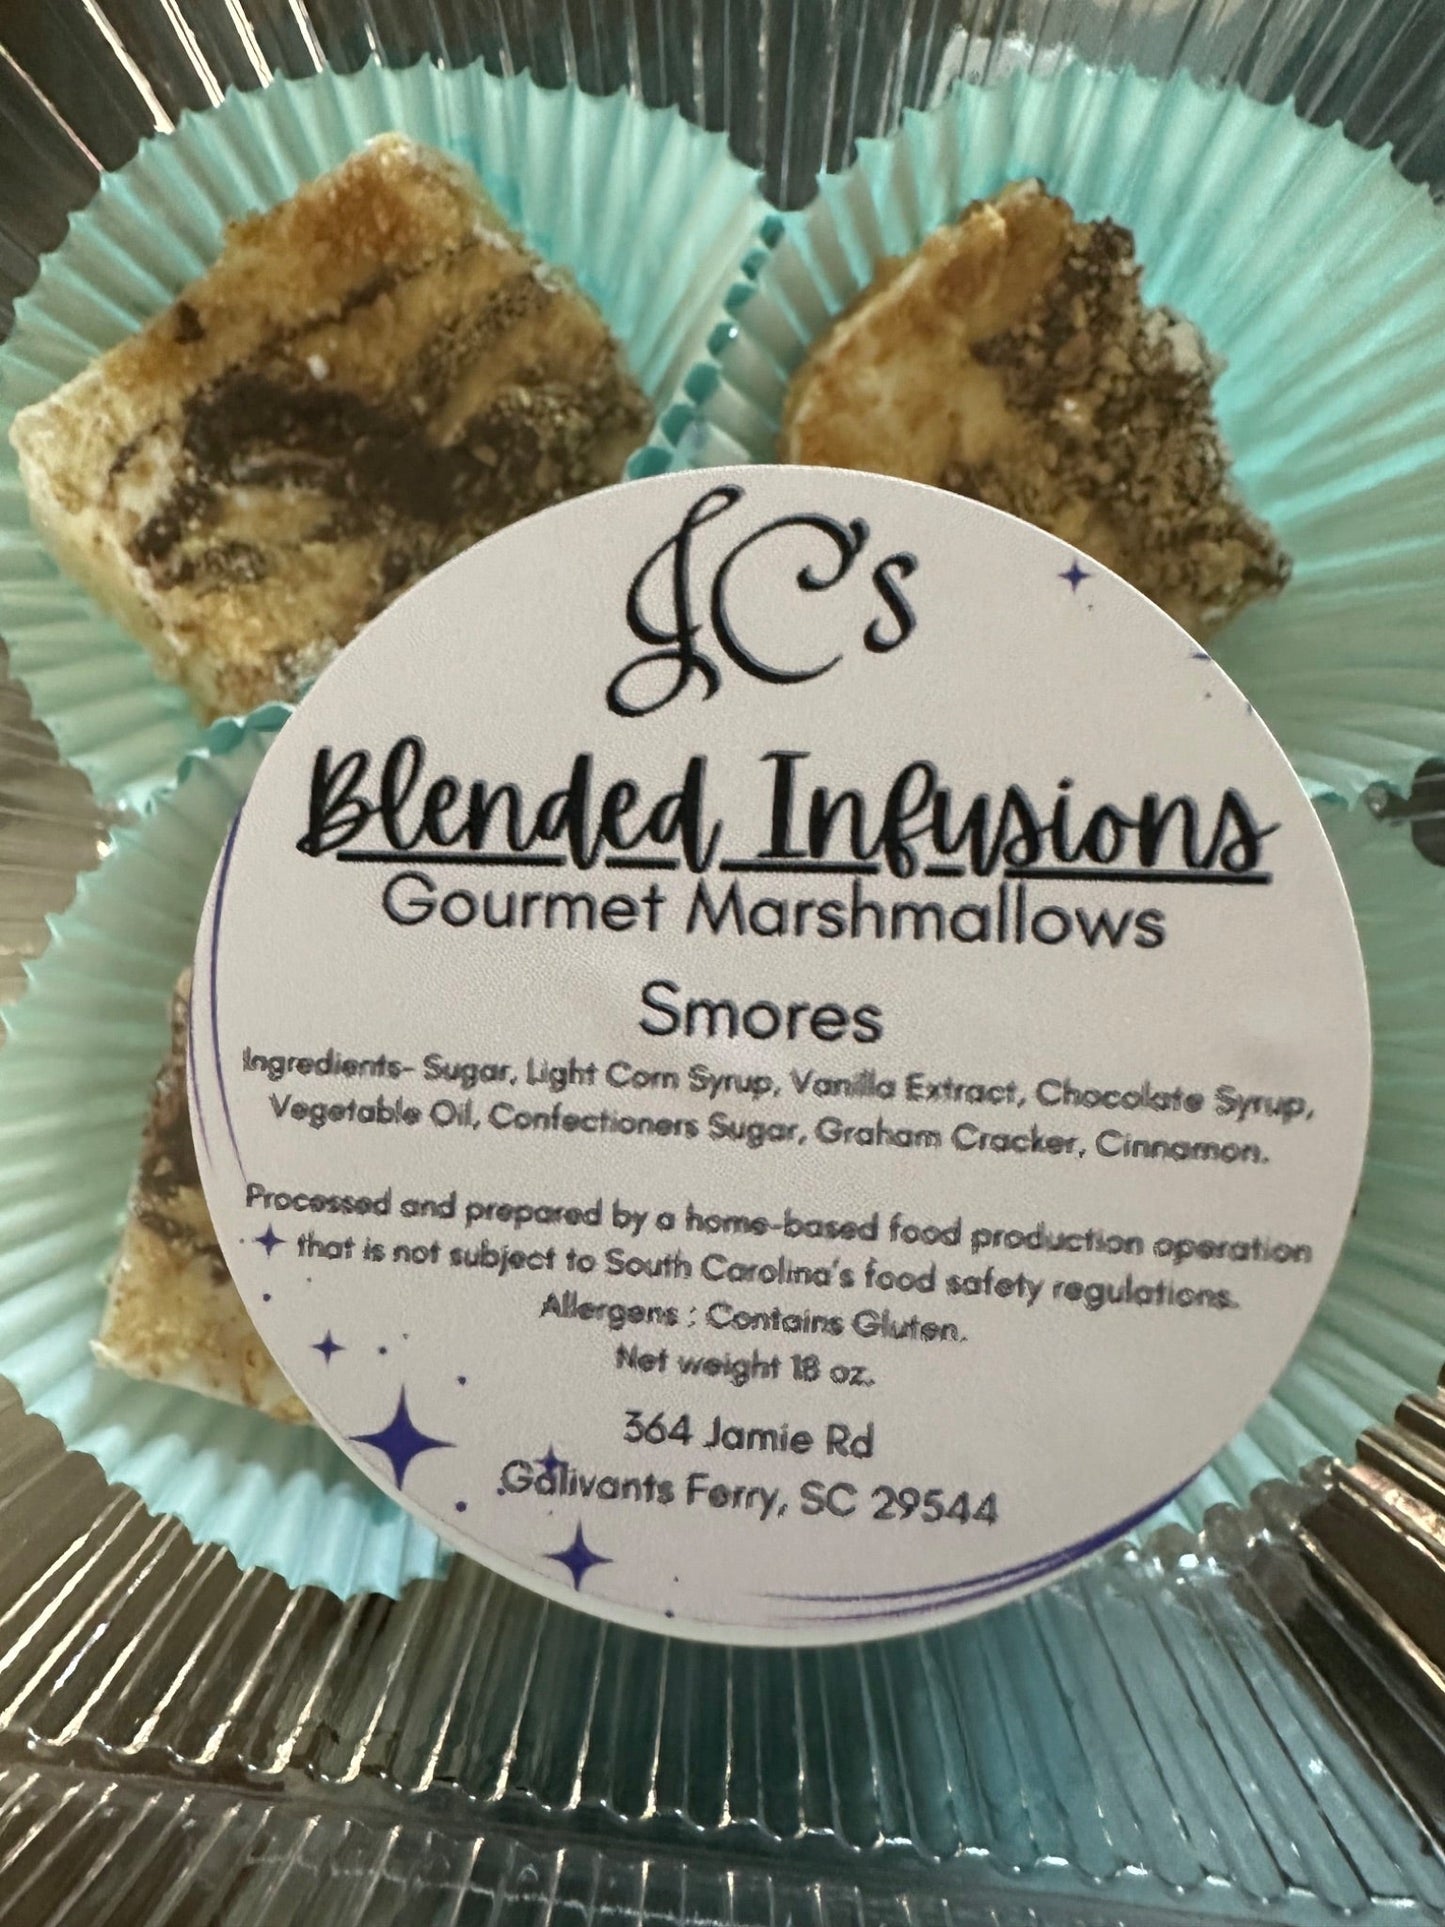 JC’s Blended Infusion Line - Homemade Gourmet Marshmallow-S’more - 2